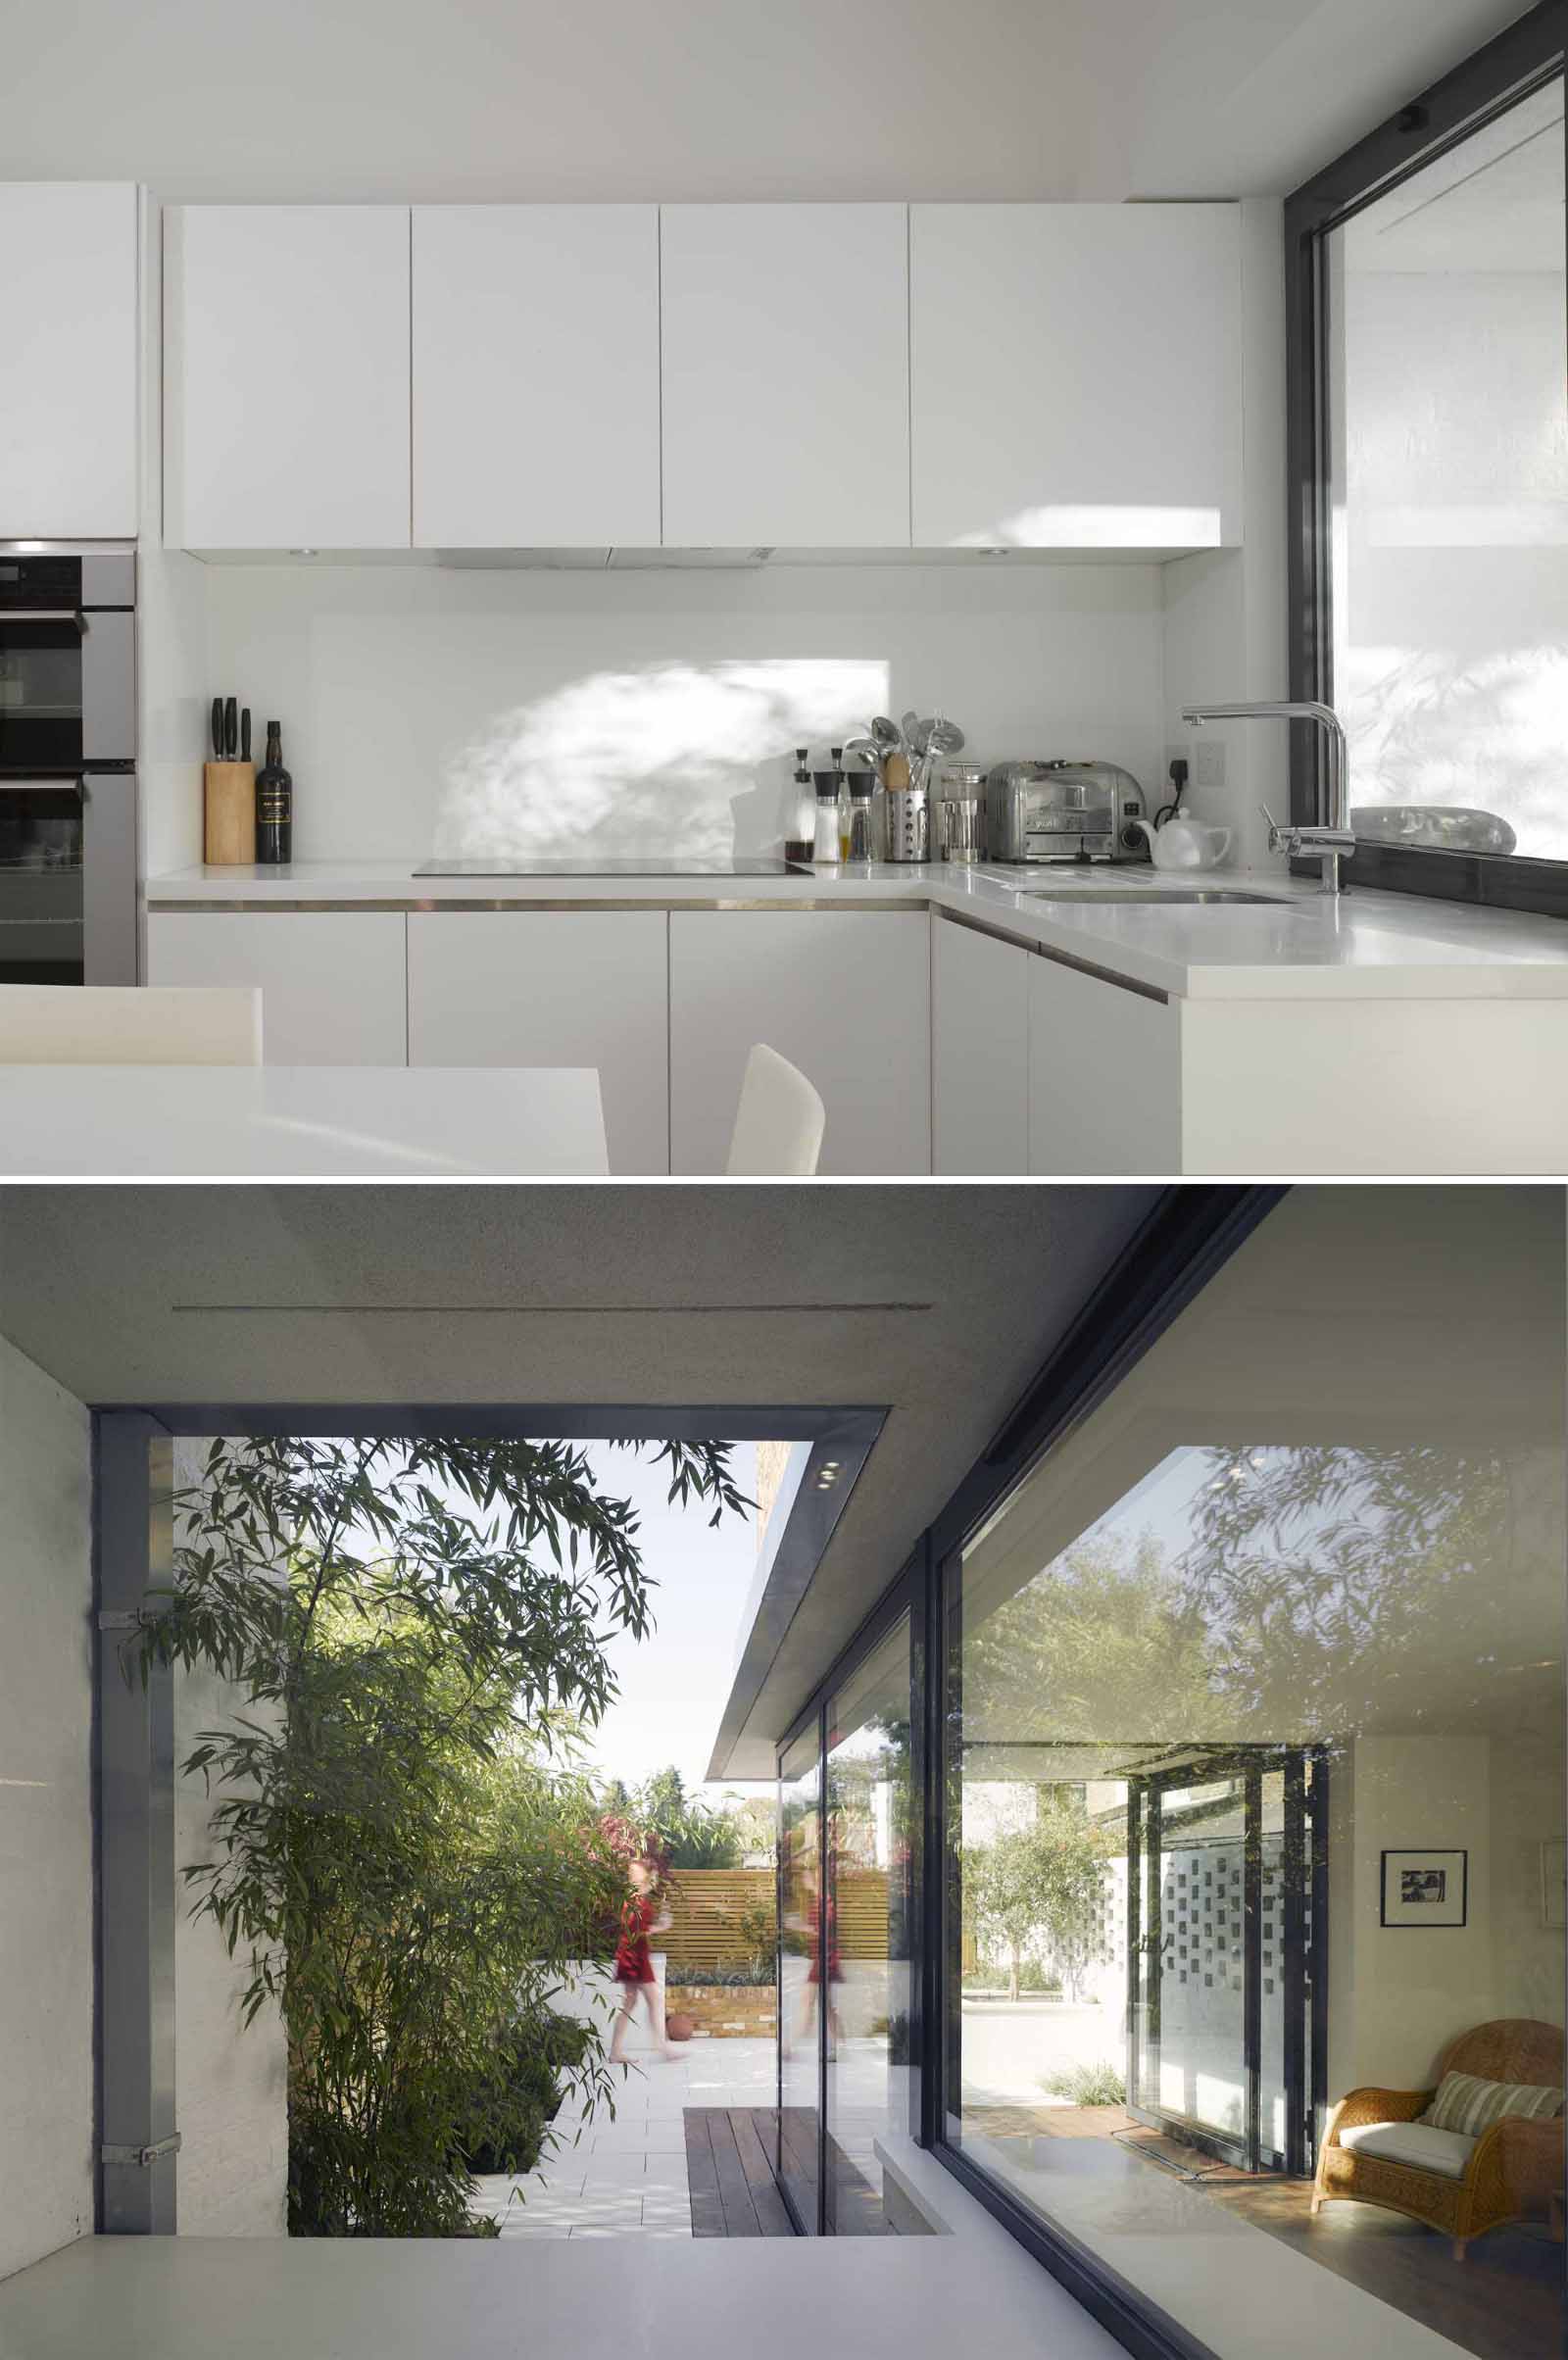 The windows and doors create a connection with the garden, while the kitchen countertop is replicated on the other side of the window.